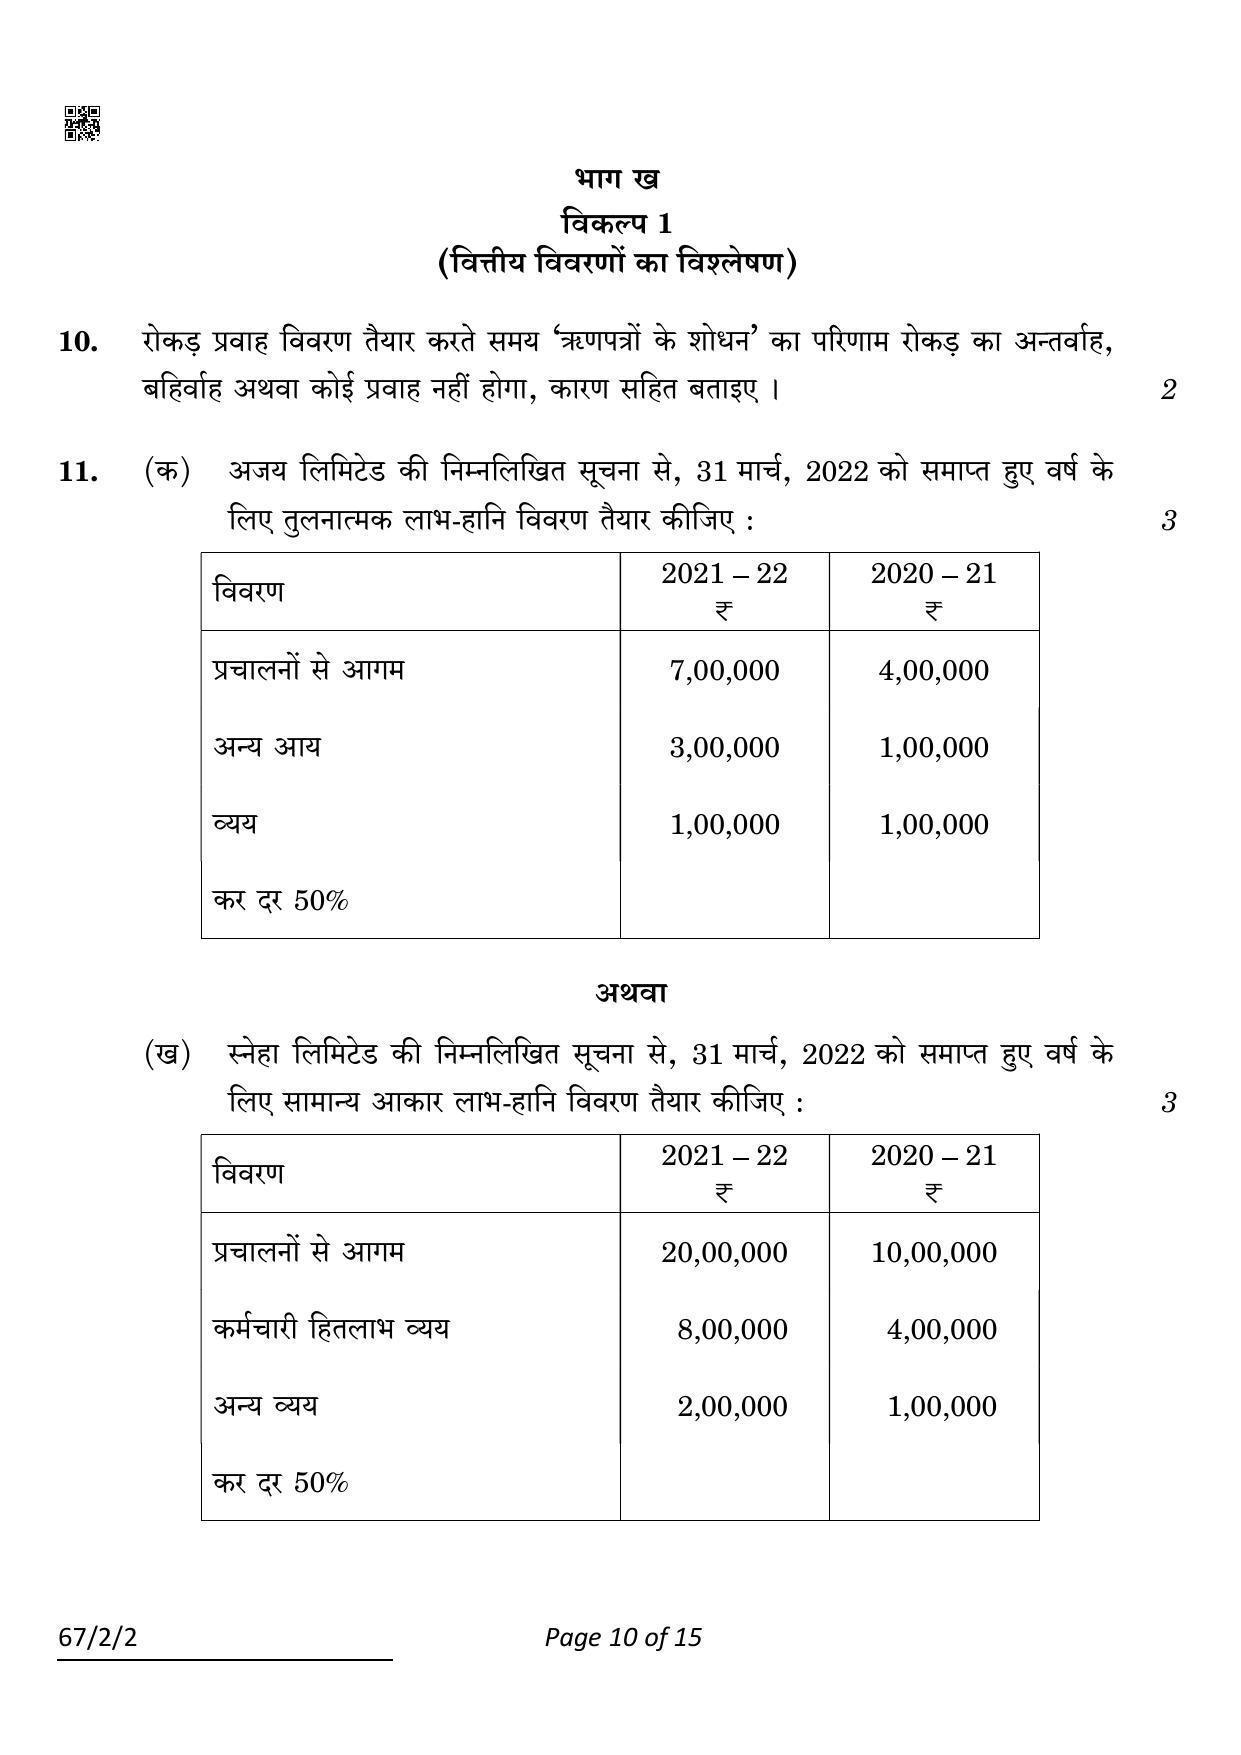 CBSE Class 12 67-2-2 Accountancy 2022 Question Paper - Page 10